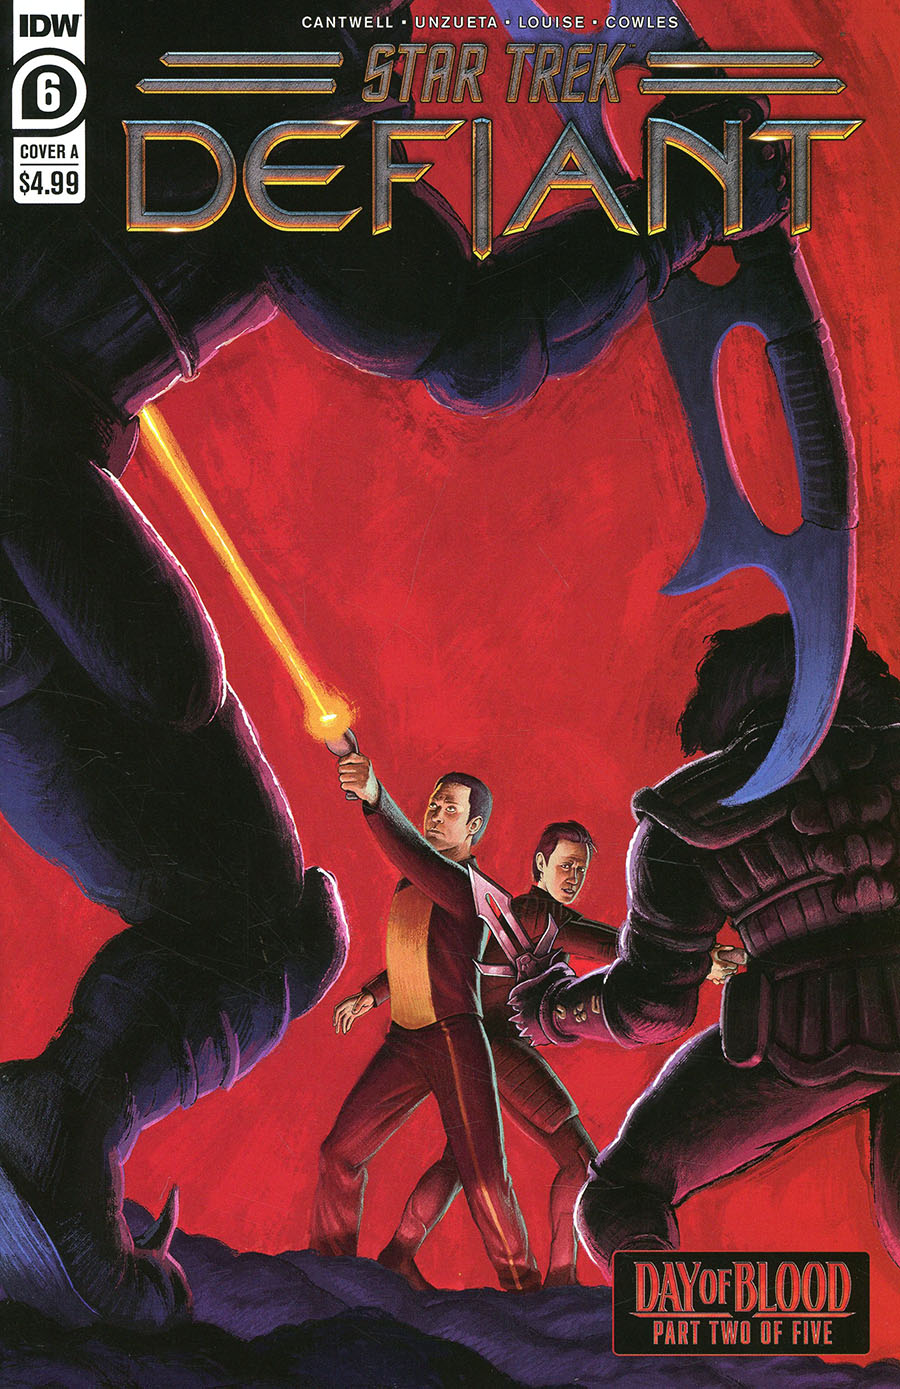 Star Trek Defiant #6 Cover A Regular Malachi Ward Cover (Day Of Blood Part 2)